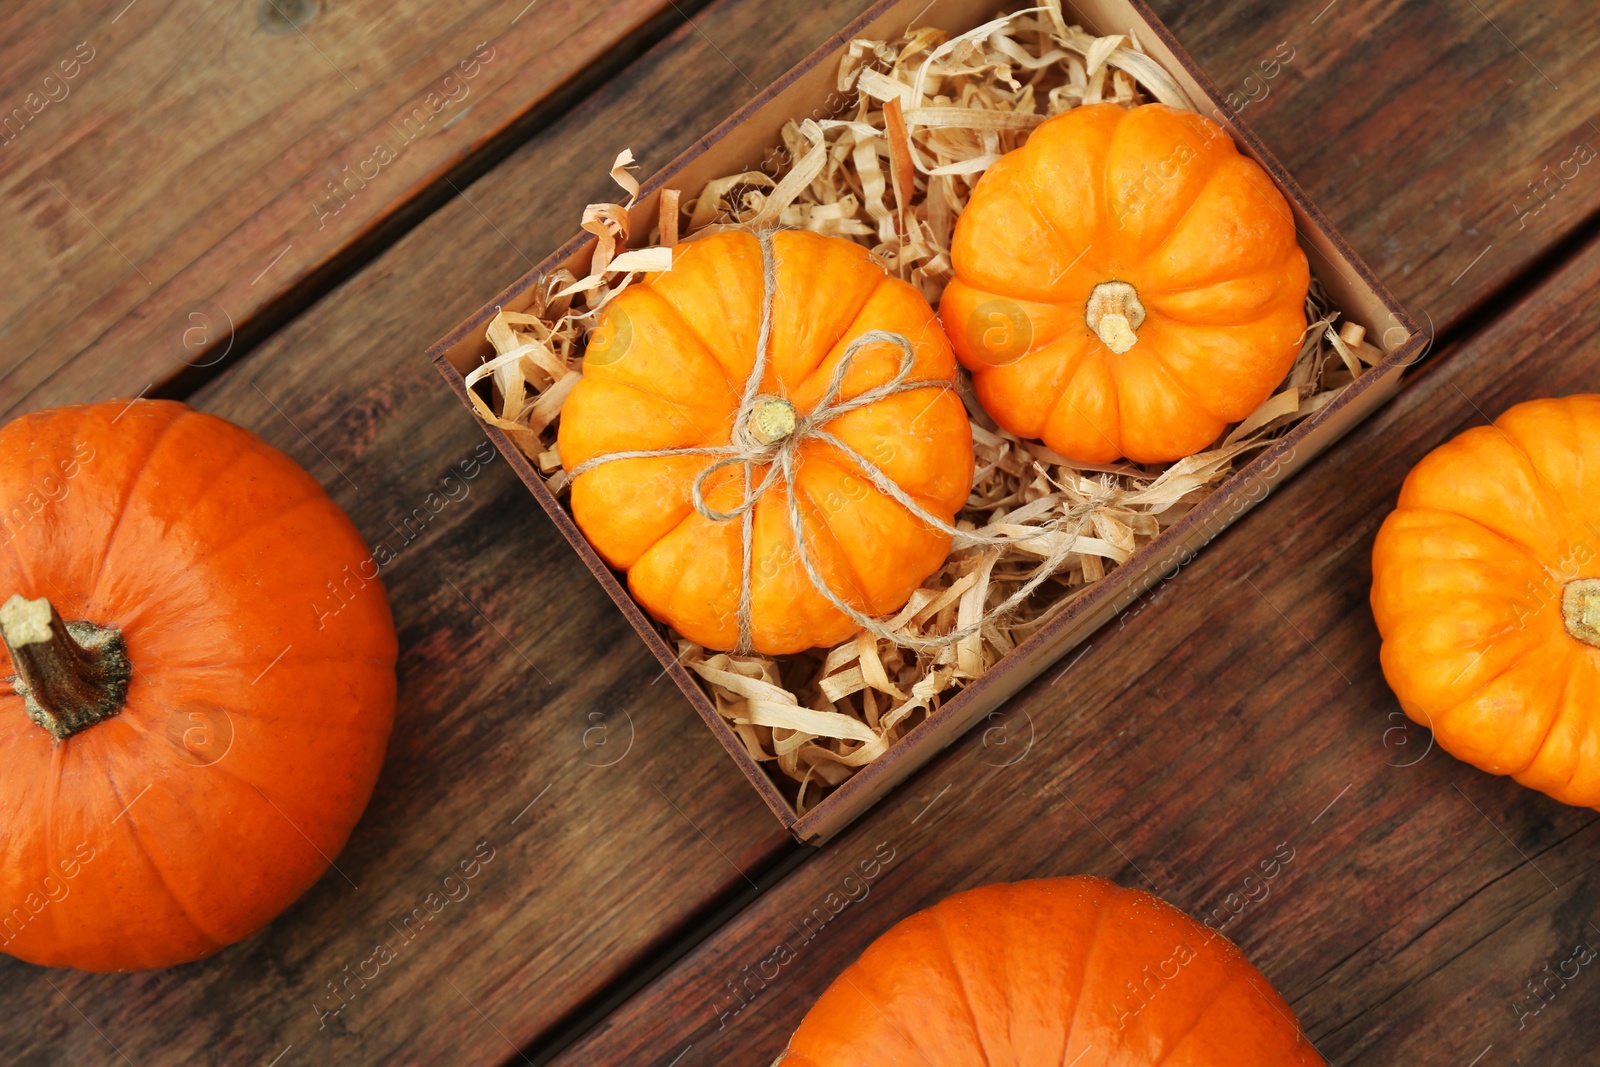 Photo of Crate and ripe pumpkins on wooden table, flat lay